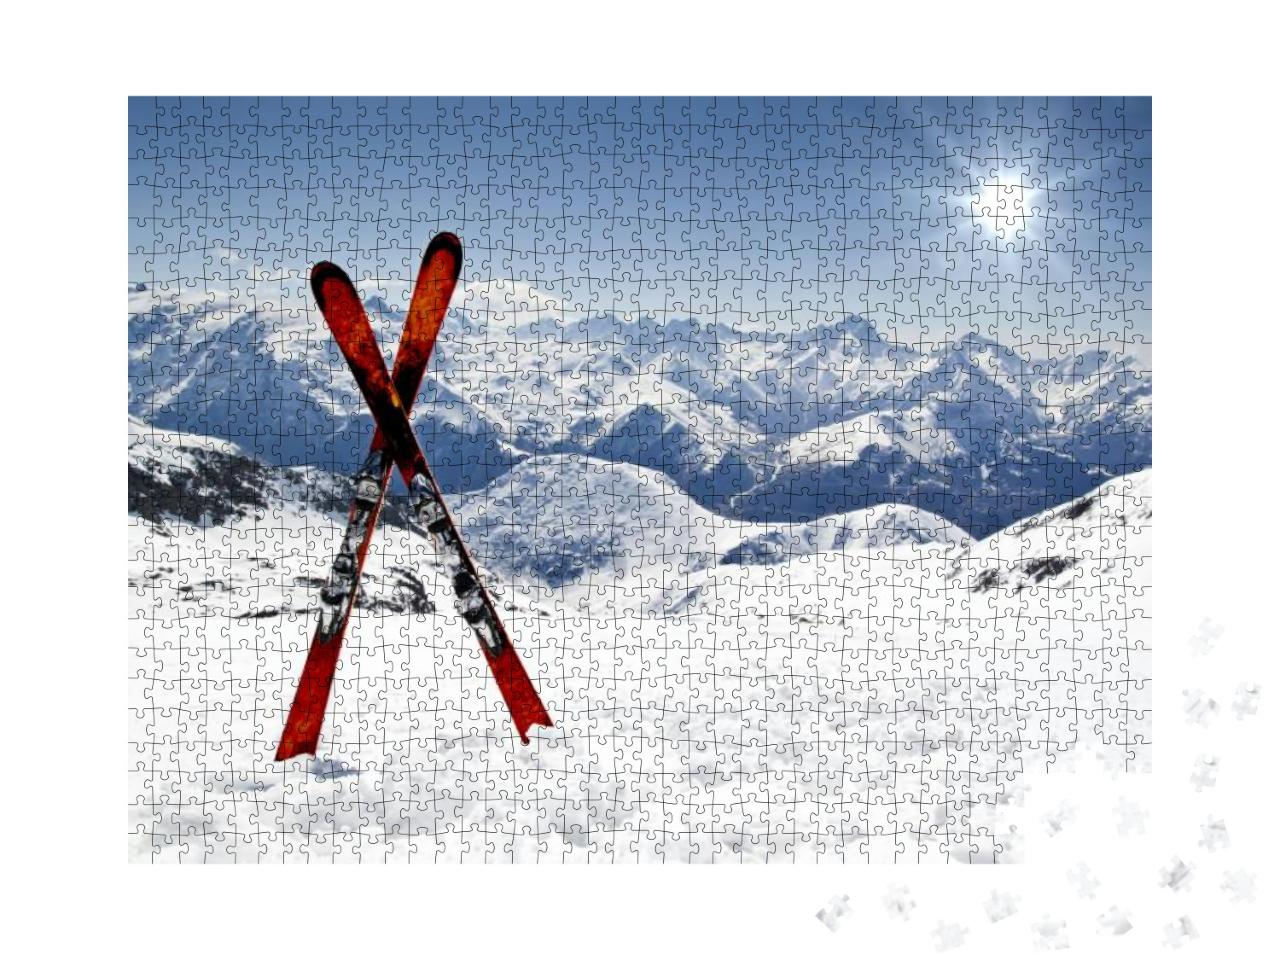 Pair of Cross Skis in Snow... Jigsaw Puzzle with 1000 pieces